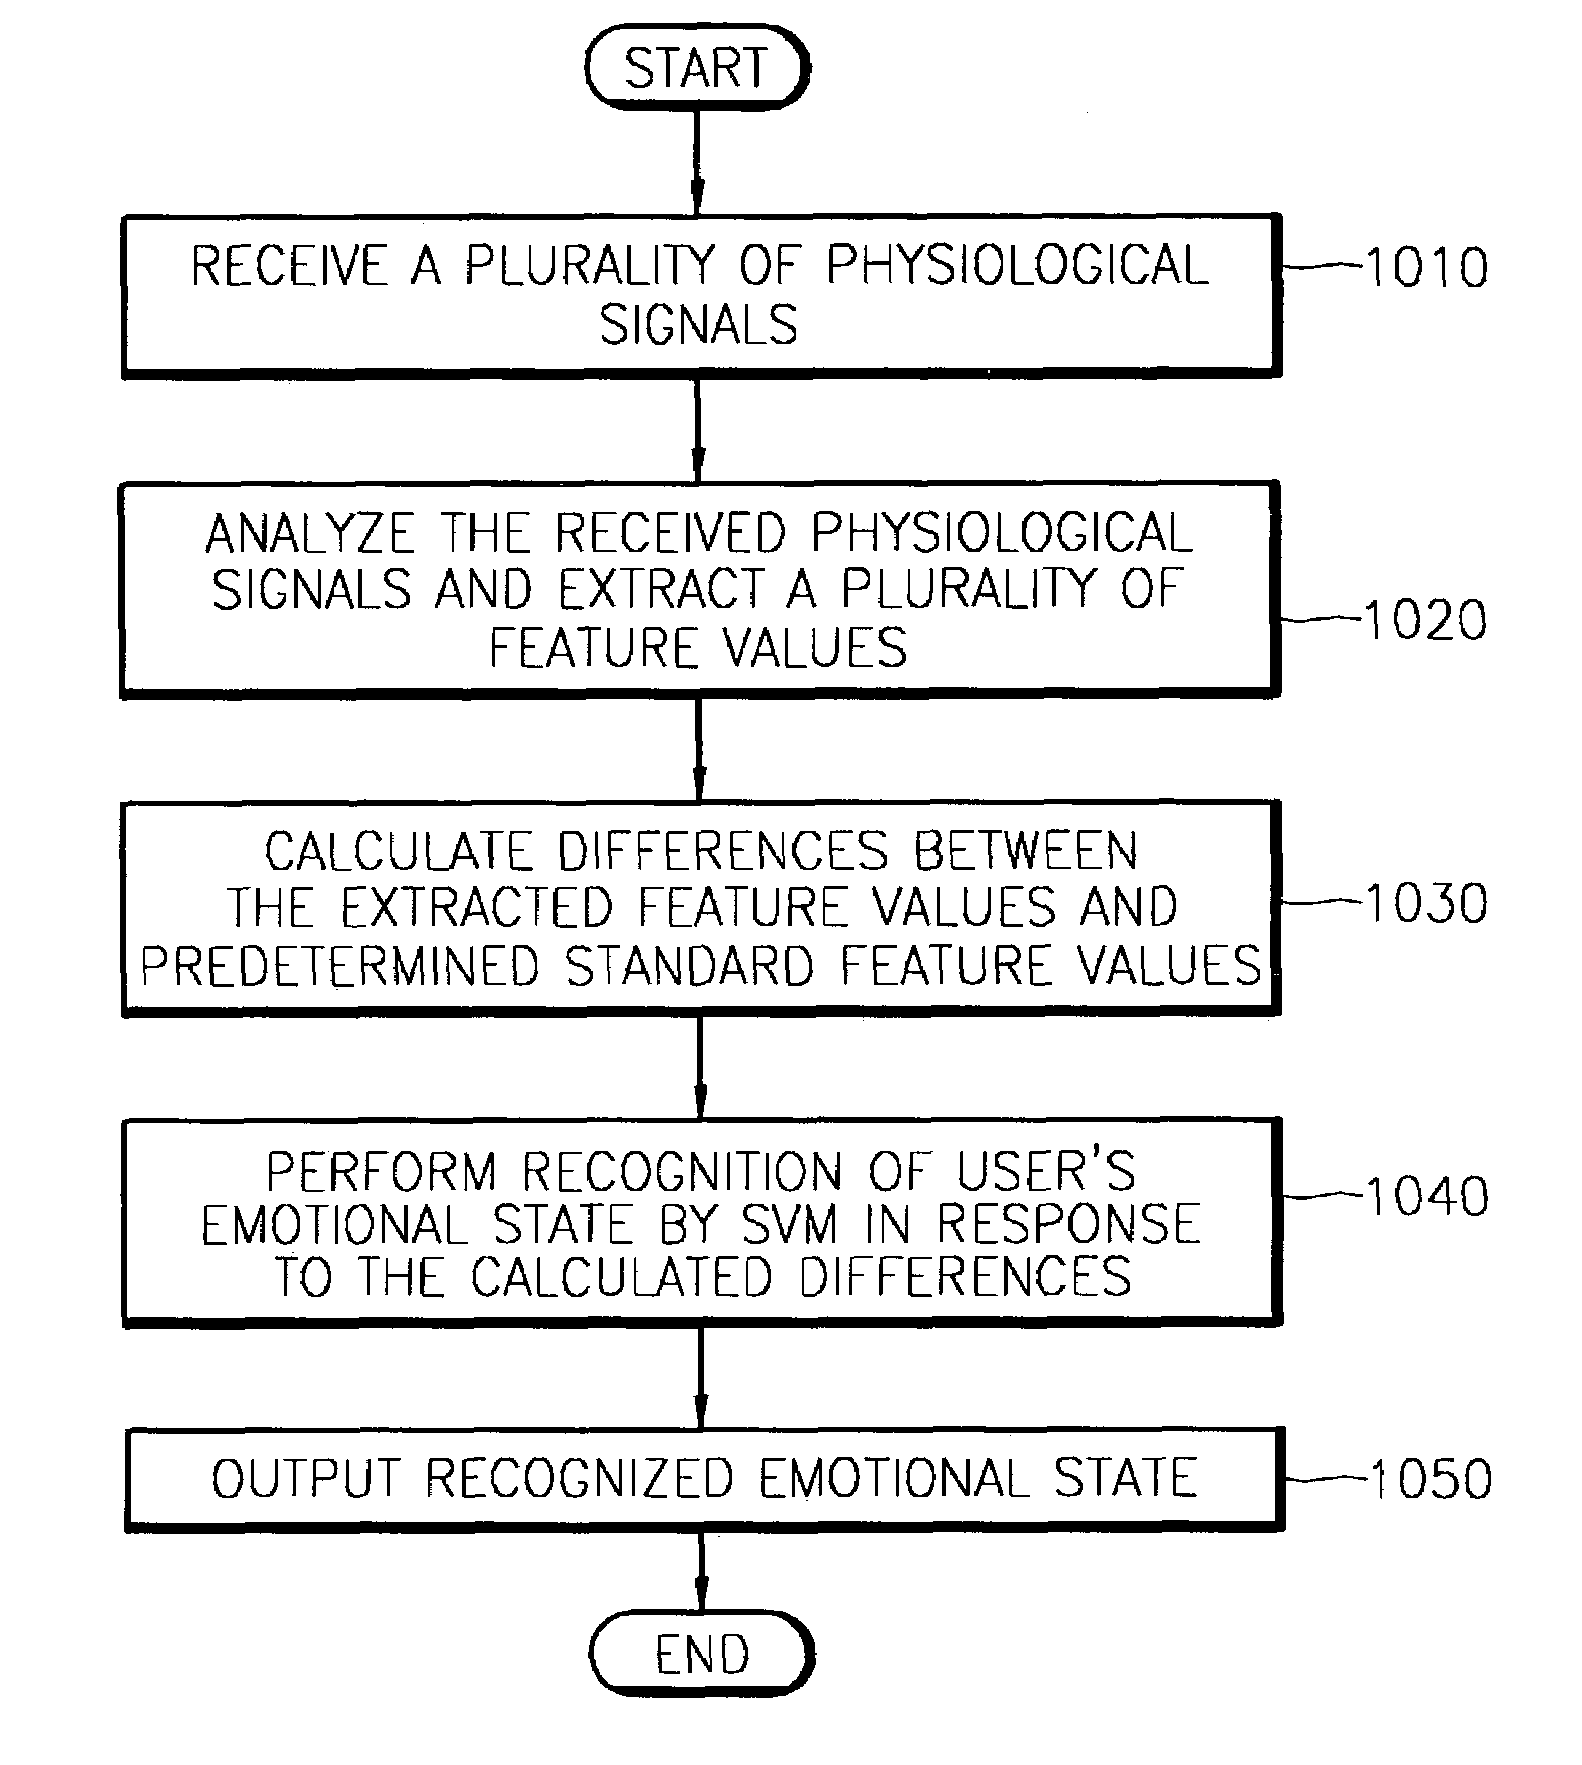 System and method for recognizing user's emotional state using short-time monitoring of physiological signals